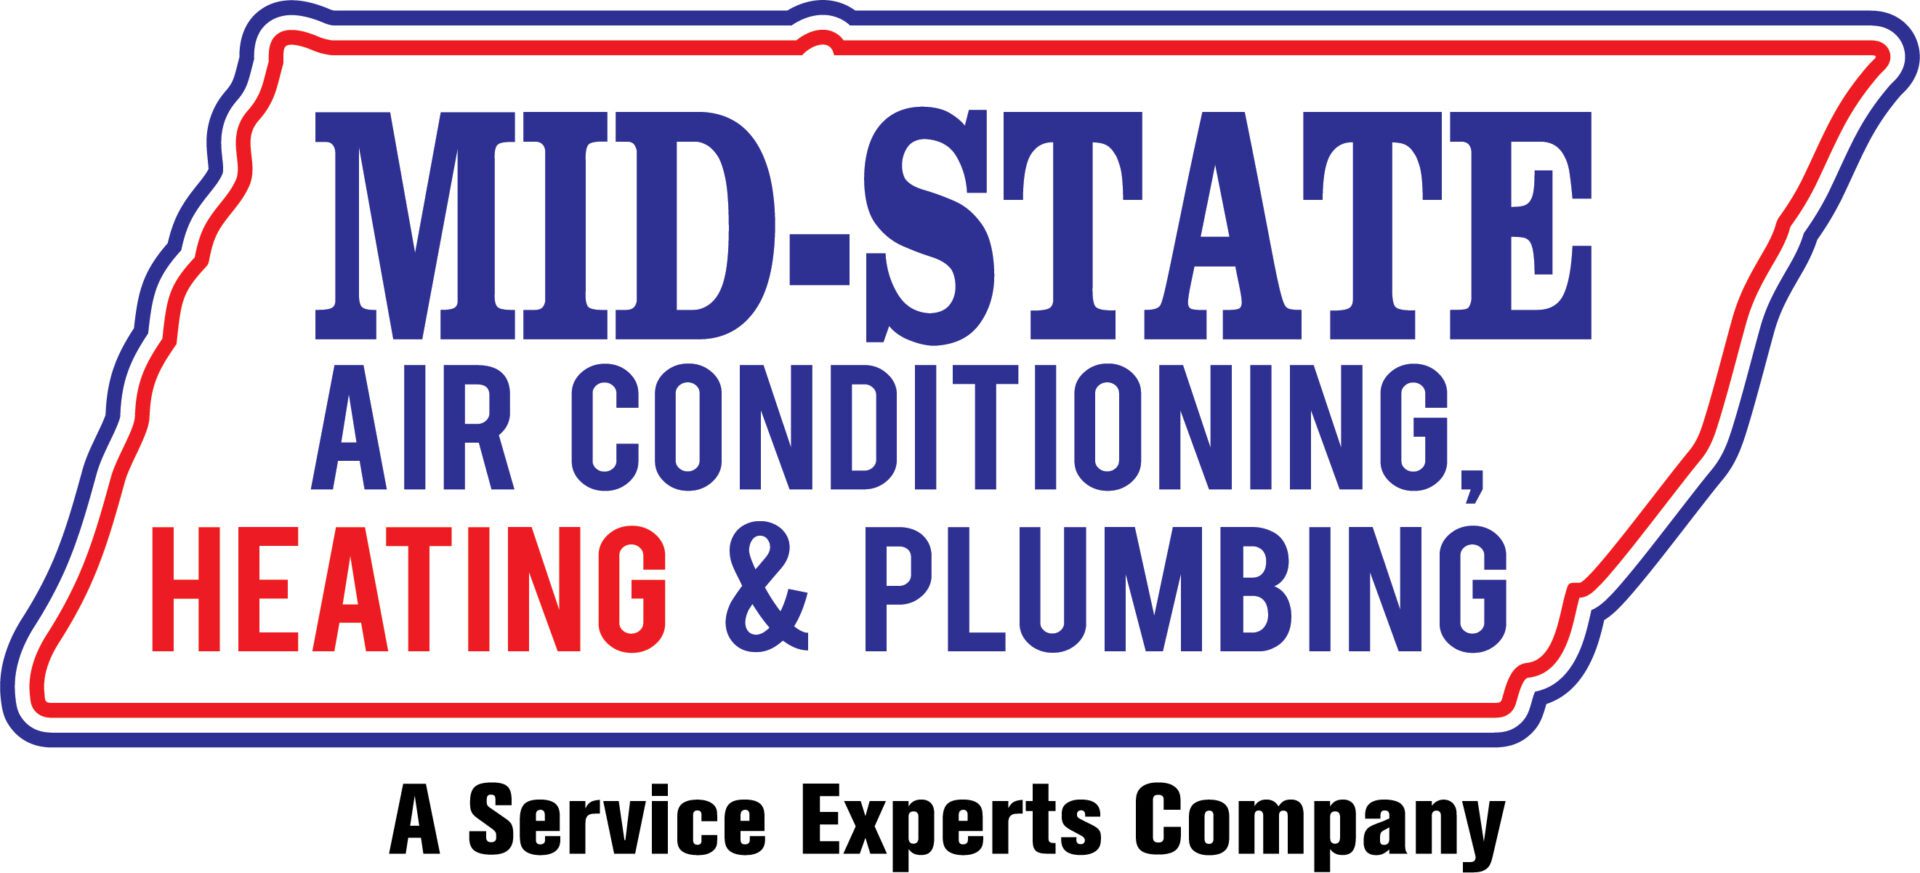 Mid-State Air Conditioning Heating & Plumbibng